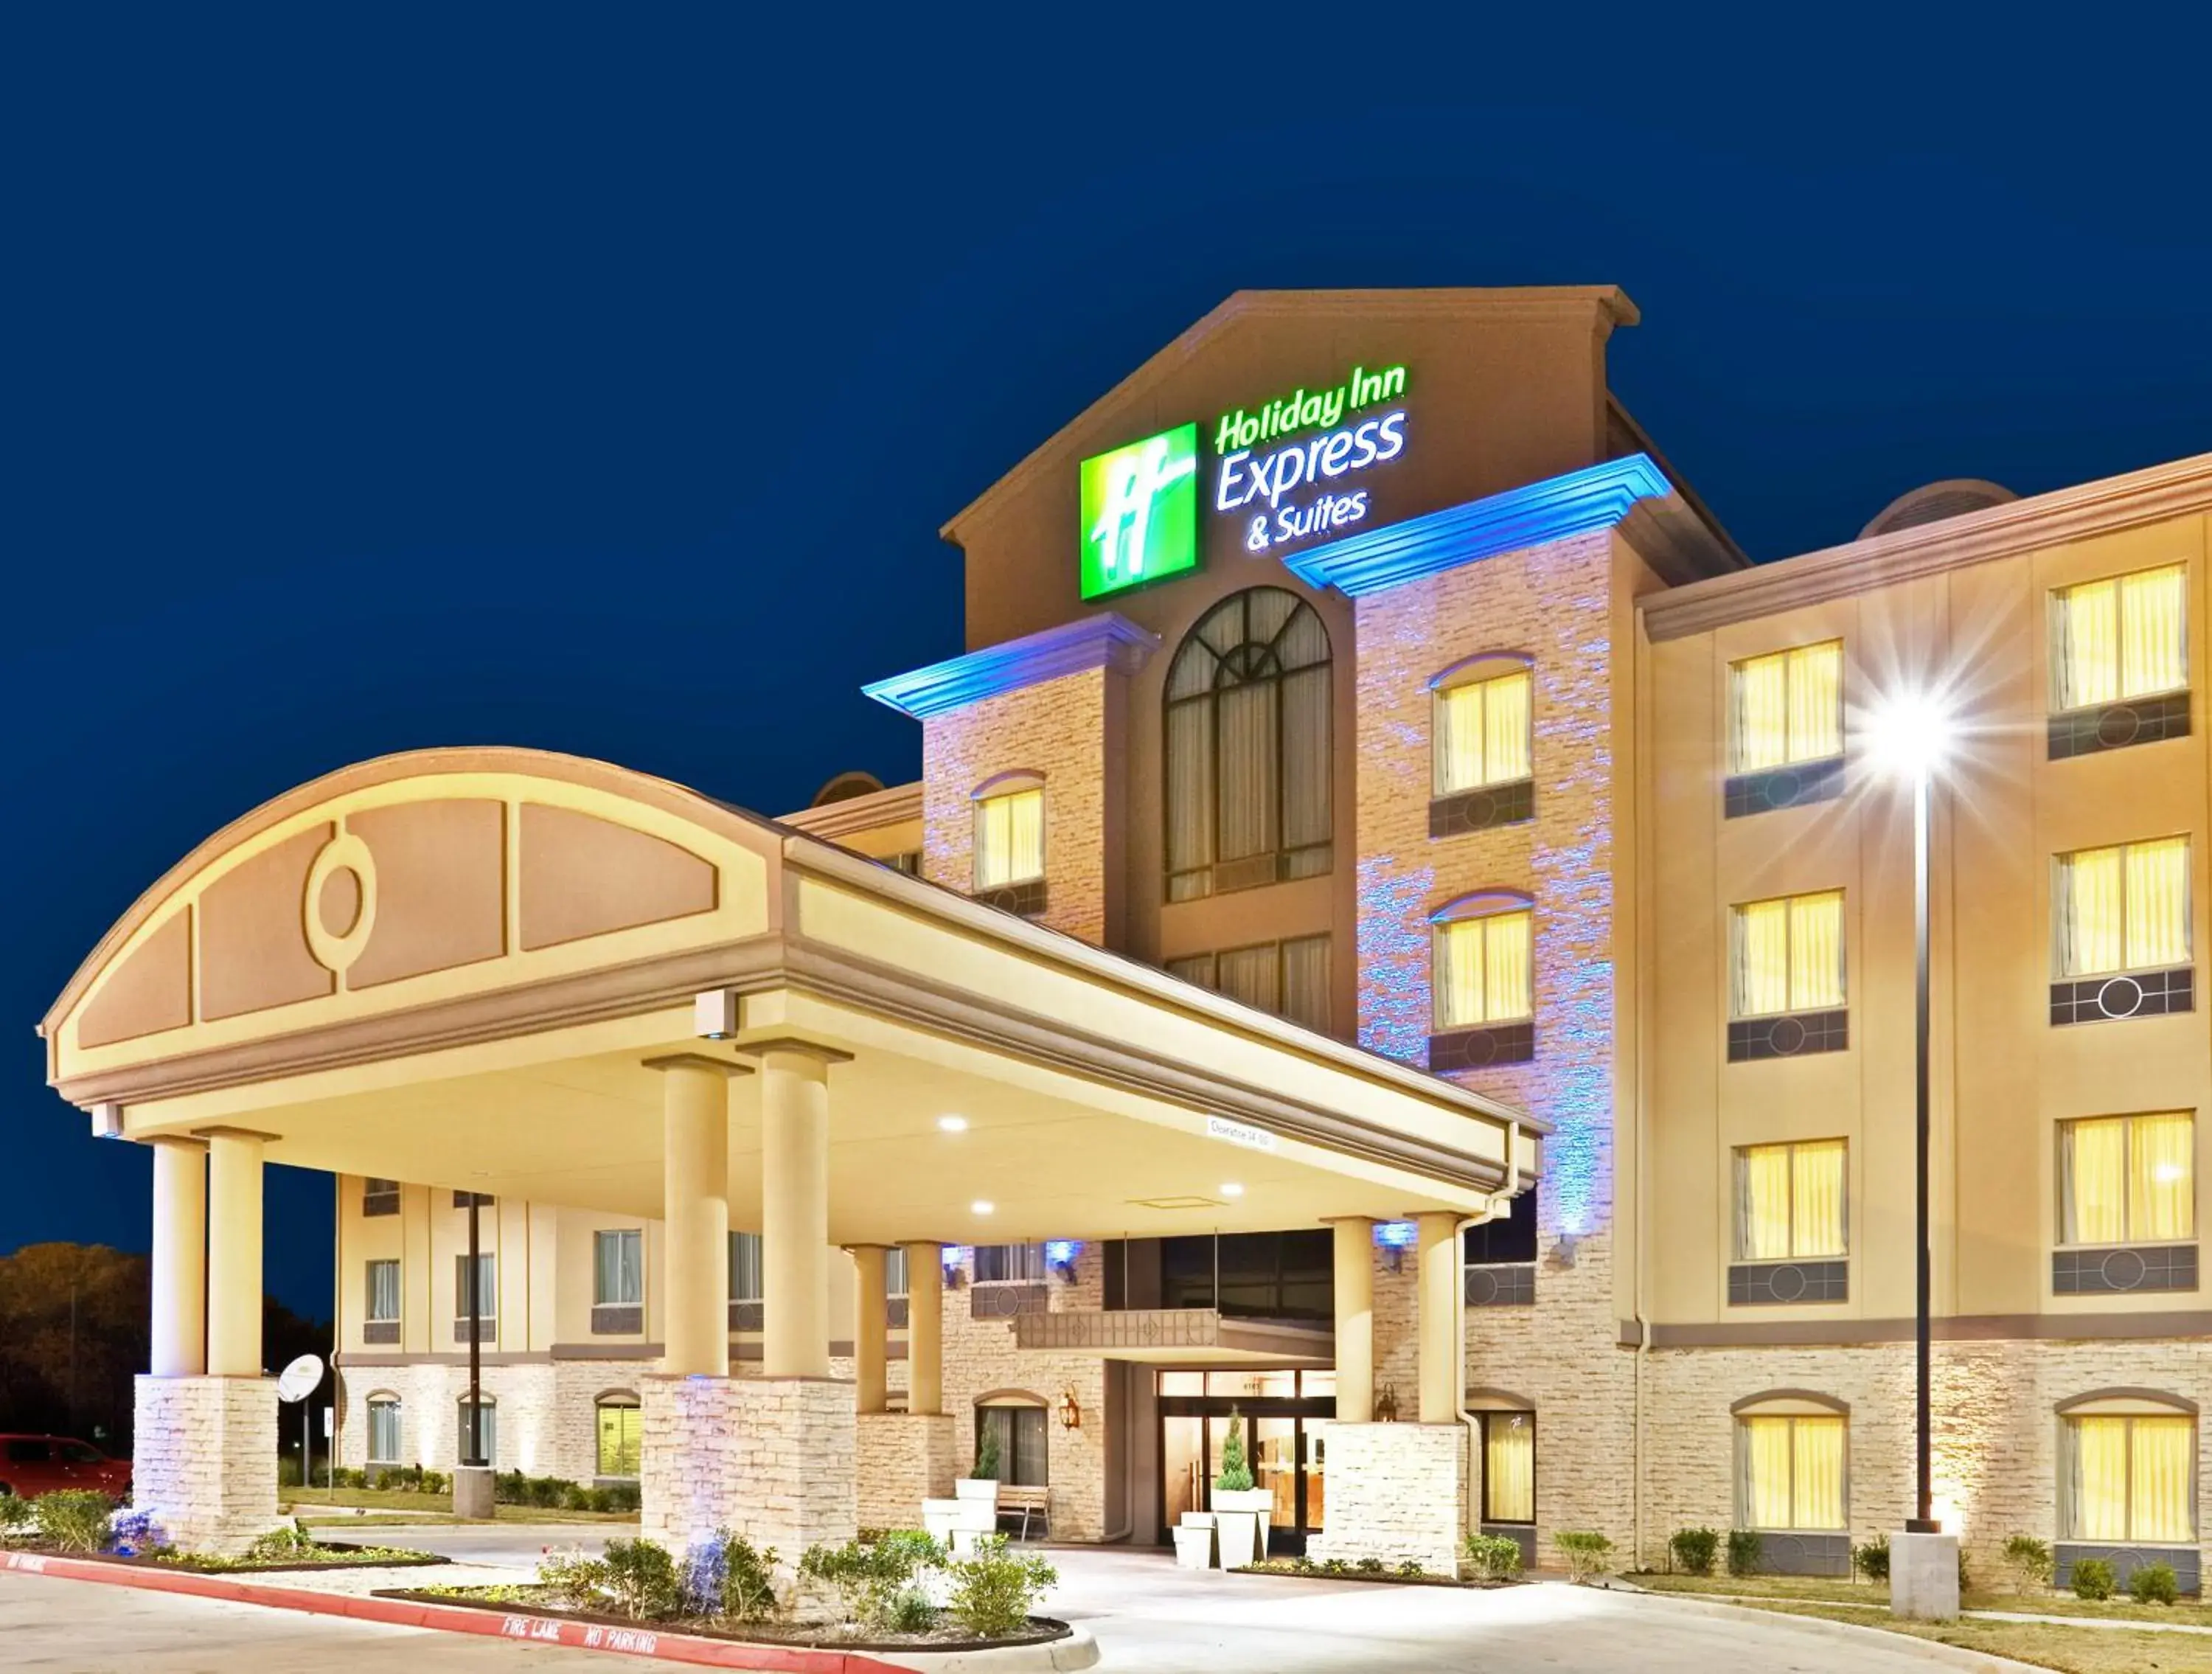 Property Building in Holiday Inn Express & Suites Dallas Fair Park